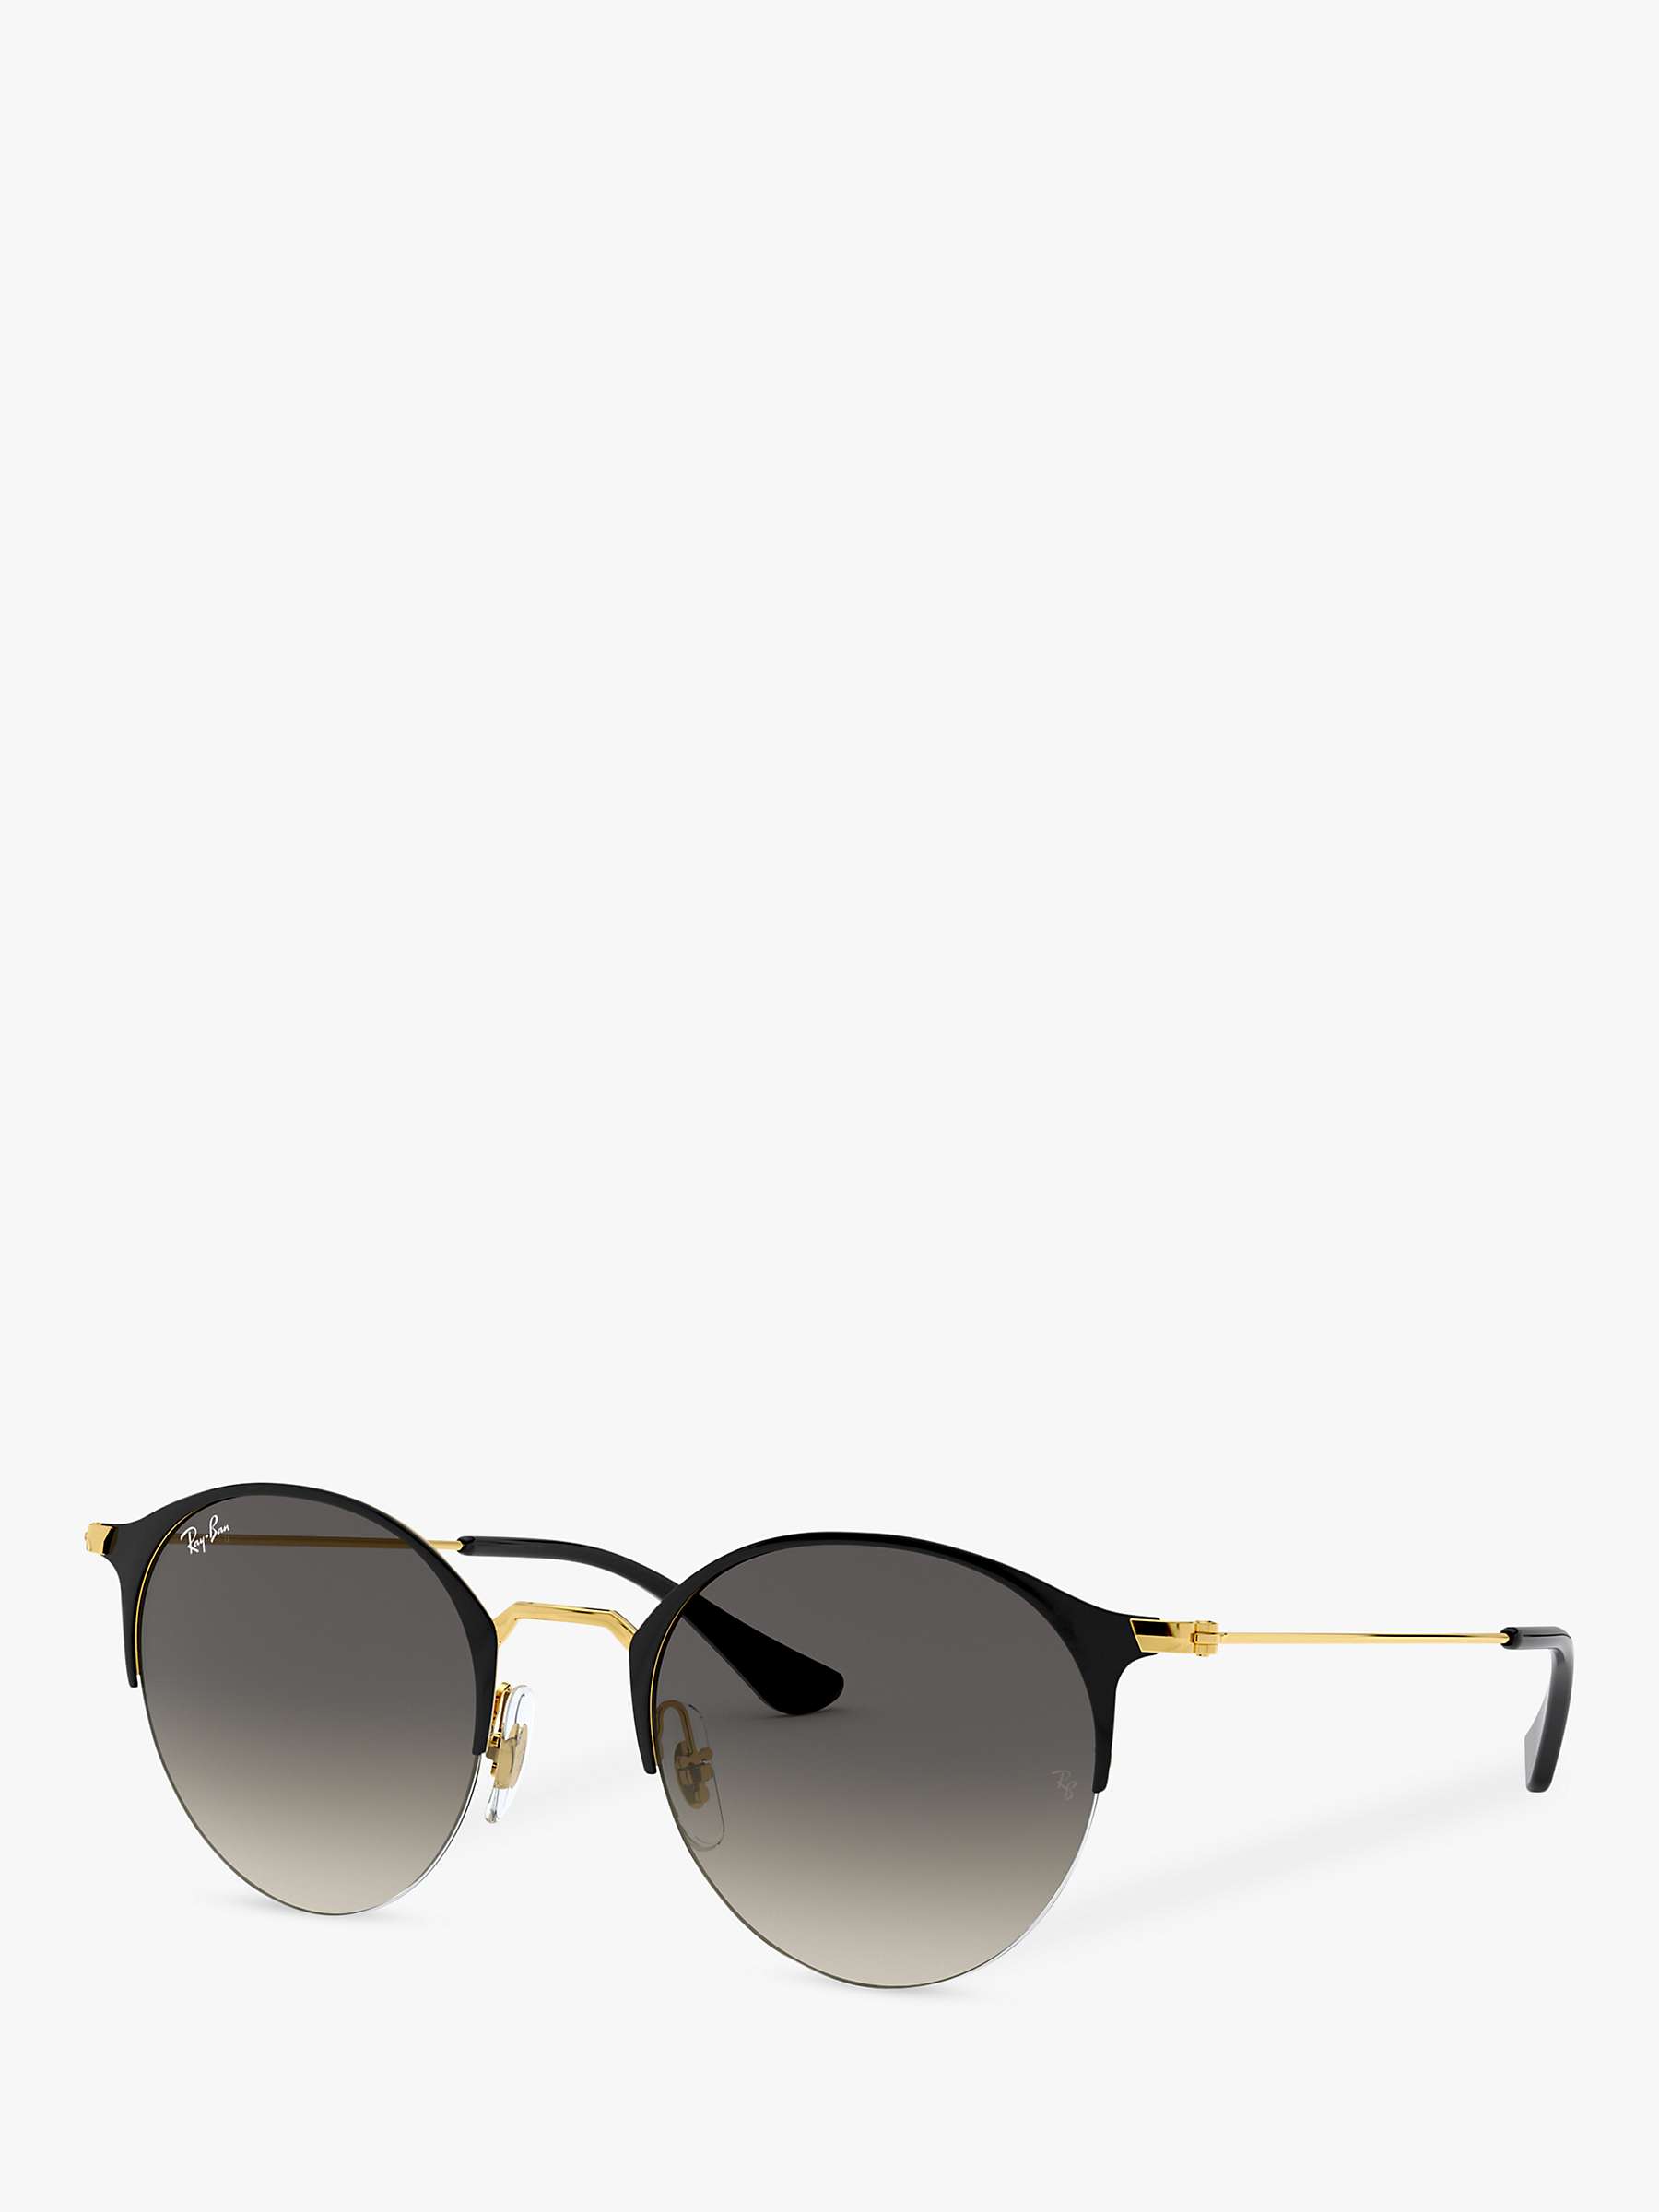 Buy Ray-Ban RB3578 Women's Oval Sunglasses, Black/Grey Gradient Online at johnlewis.com